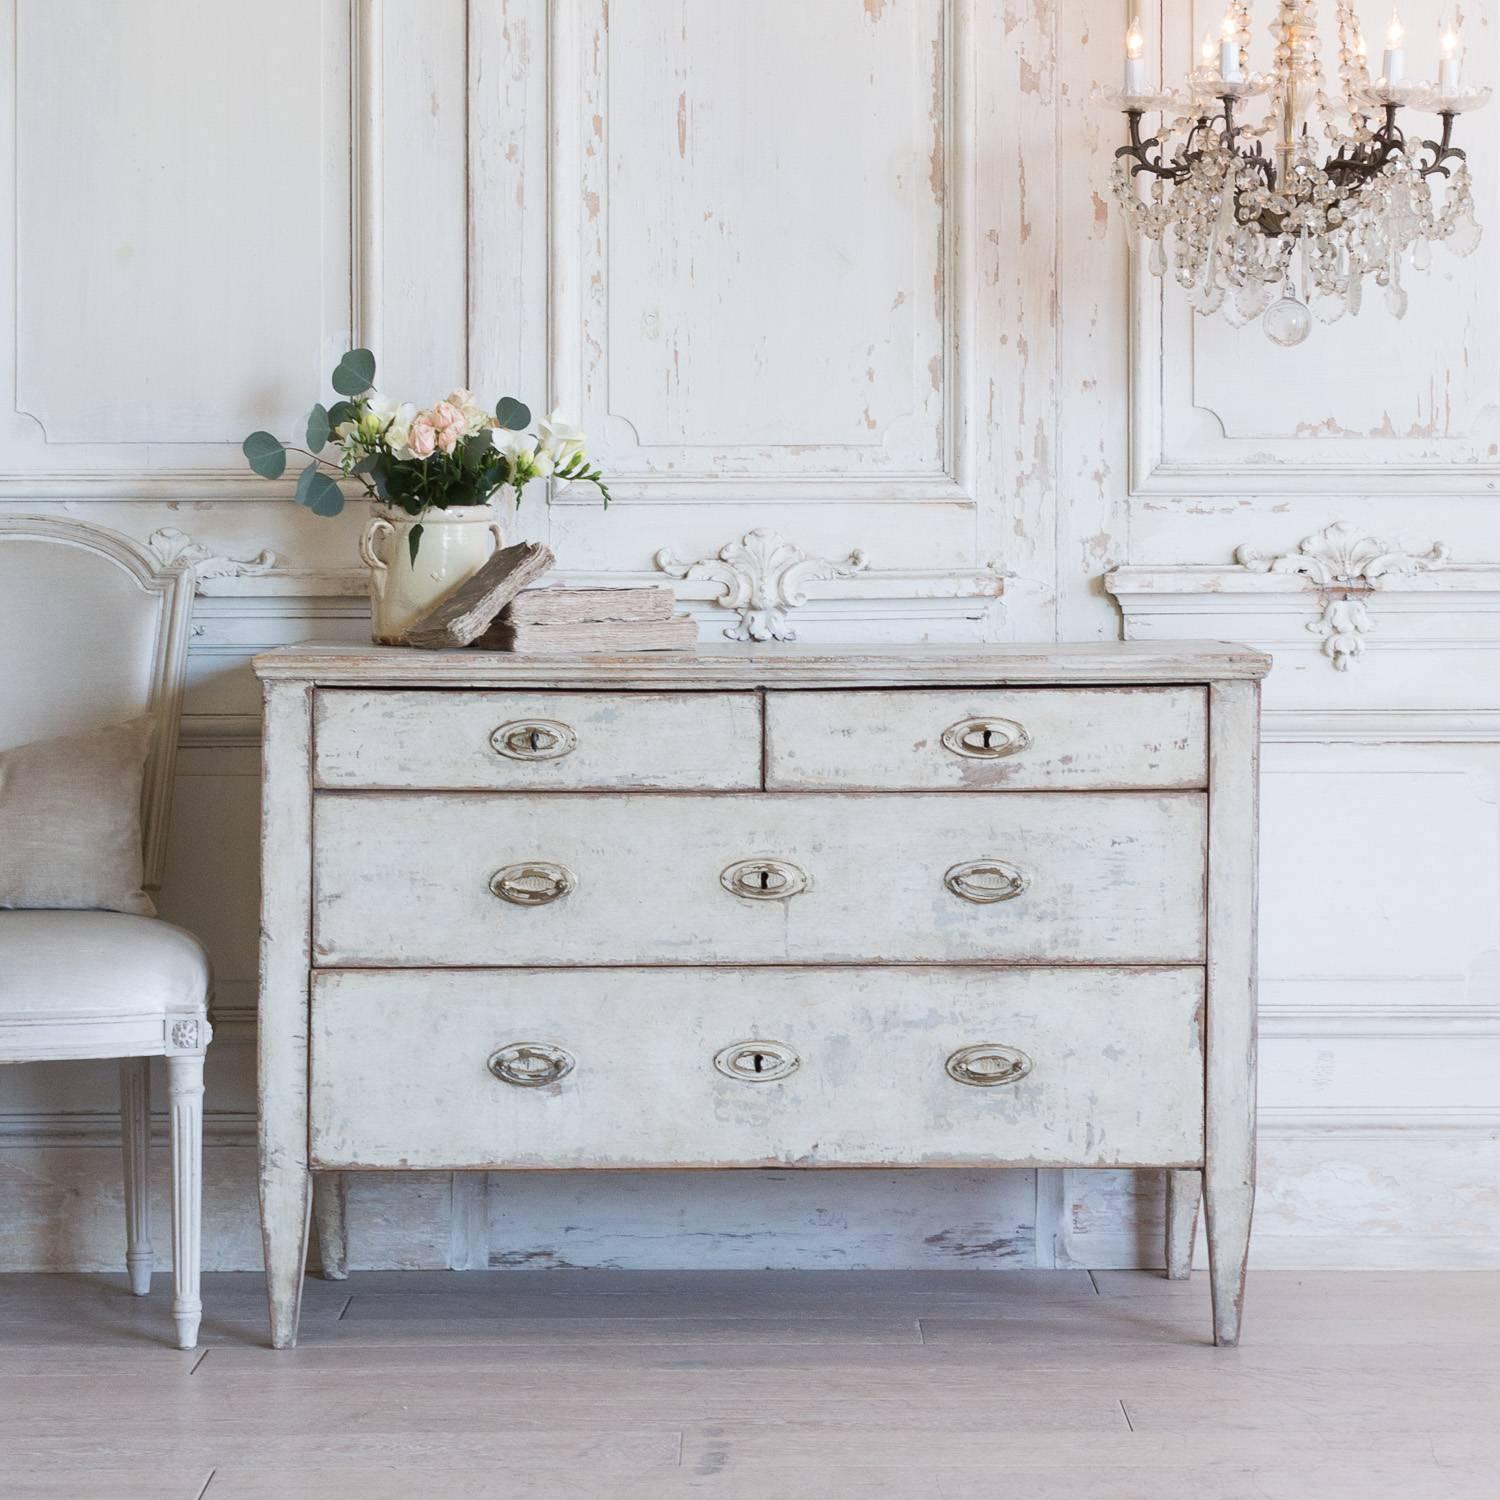 Gorgeous antique dresser with four drawers. The distressed hardware complete with a with functional key adds to the presentation of this piece. The age shows beautifully through the layers of paint and chipping presented throughout this piece. A